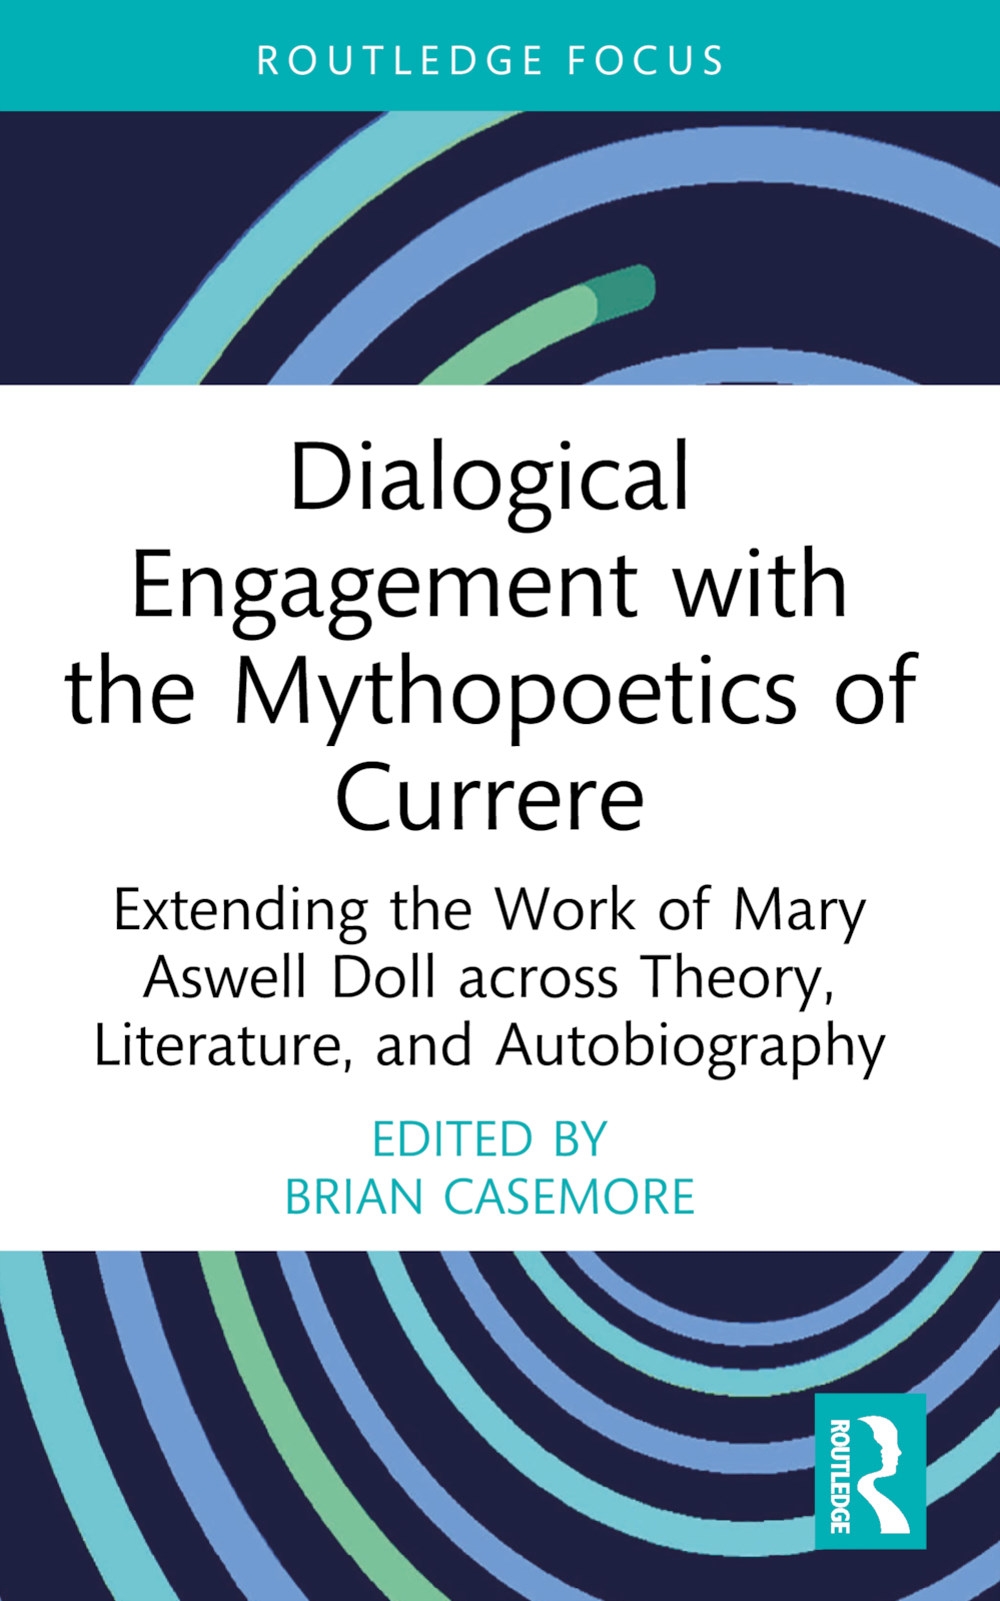 Dialogical Engagement with the Mythopoetics of Currere: Extending the Work of Mary Aswell Doll Across Theory, Literature, and Autobiography